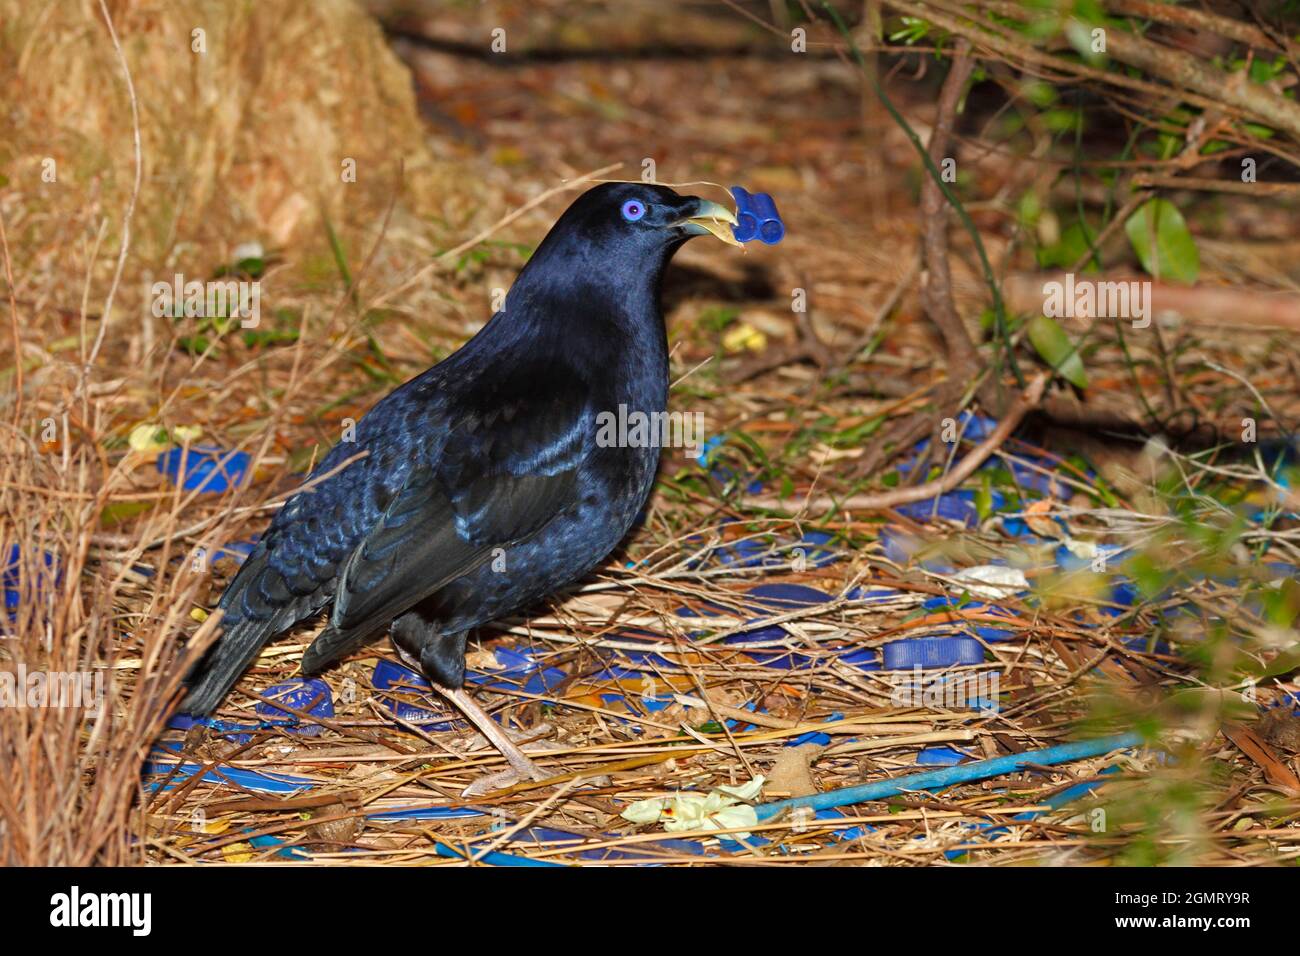 Male Satin Bowerbird, Ptilonorhynchus violaceus, standing beside his bower with yellow and blue objects in his beak as he dispays for a nearby female. Stock Photo